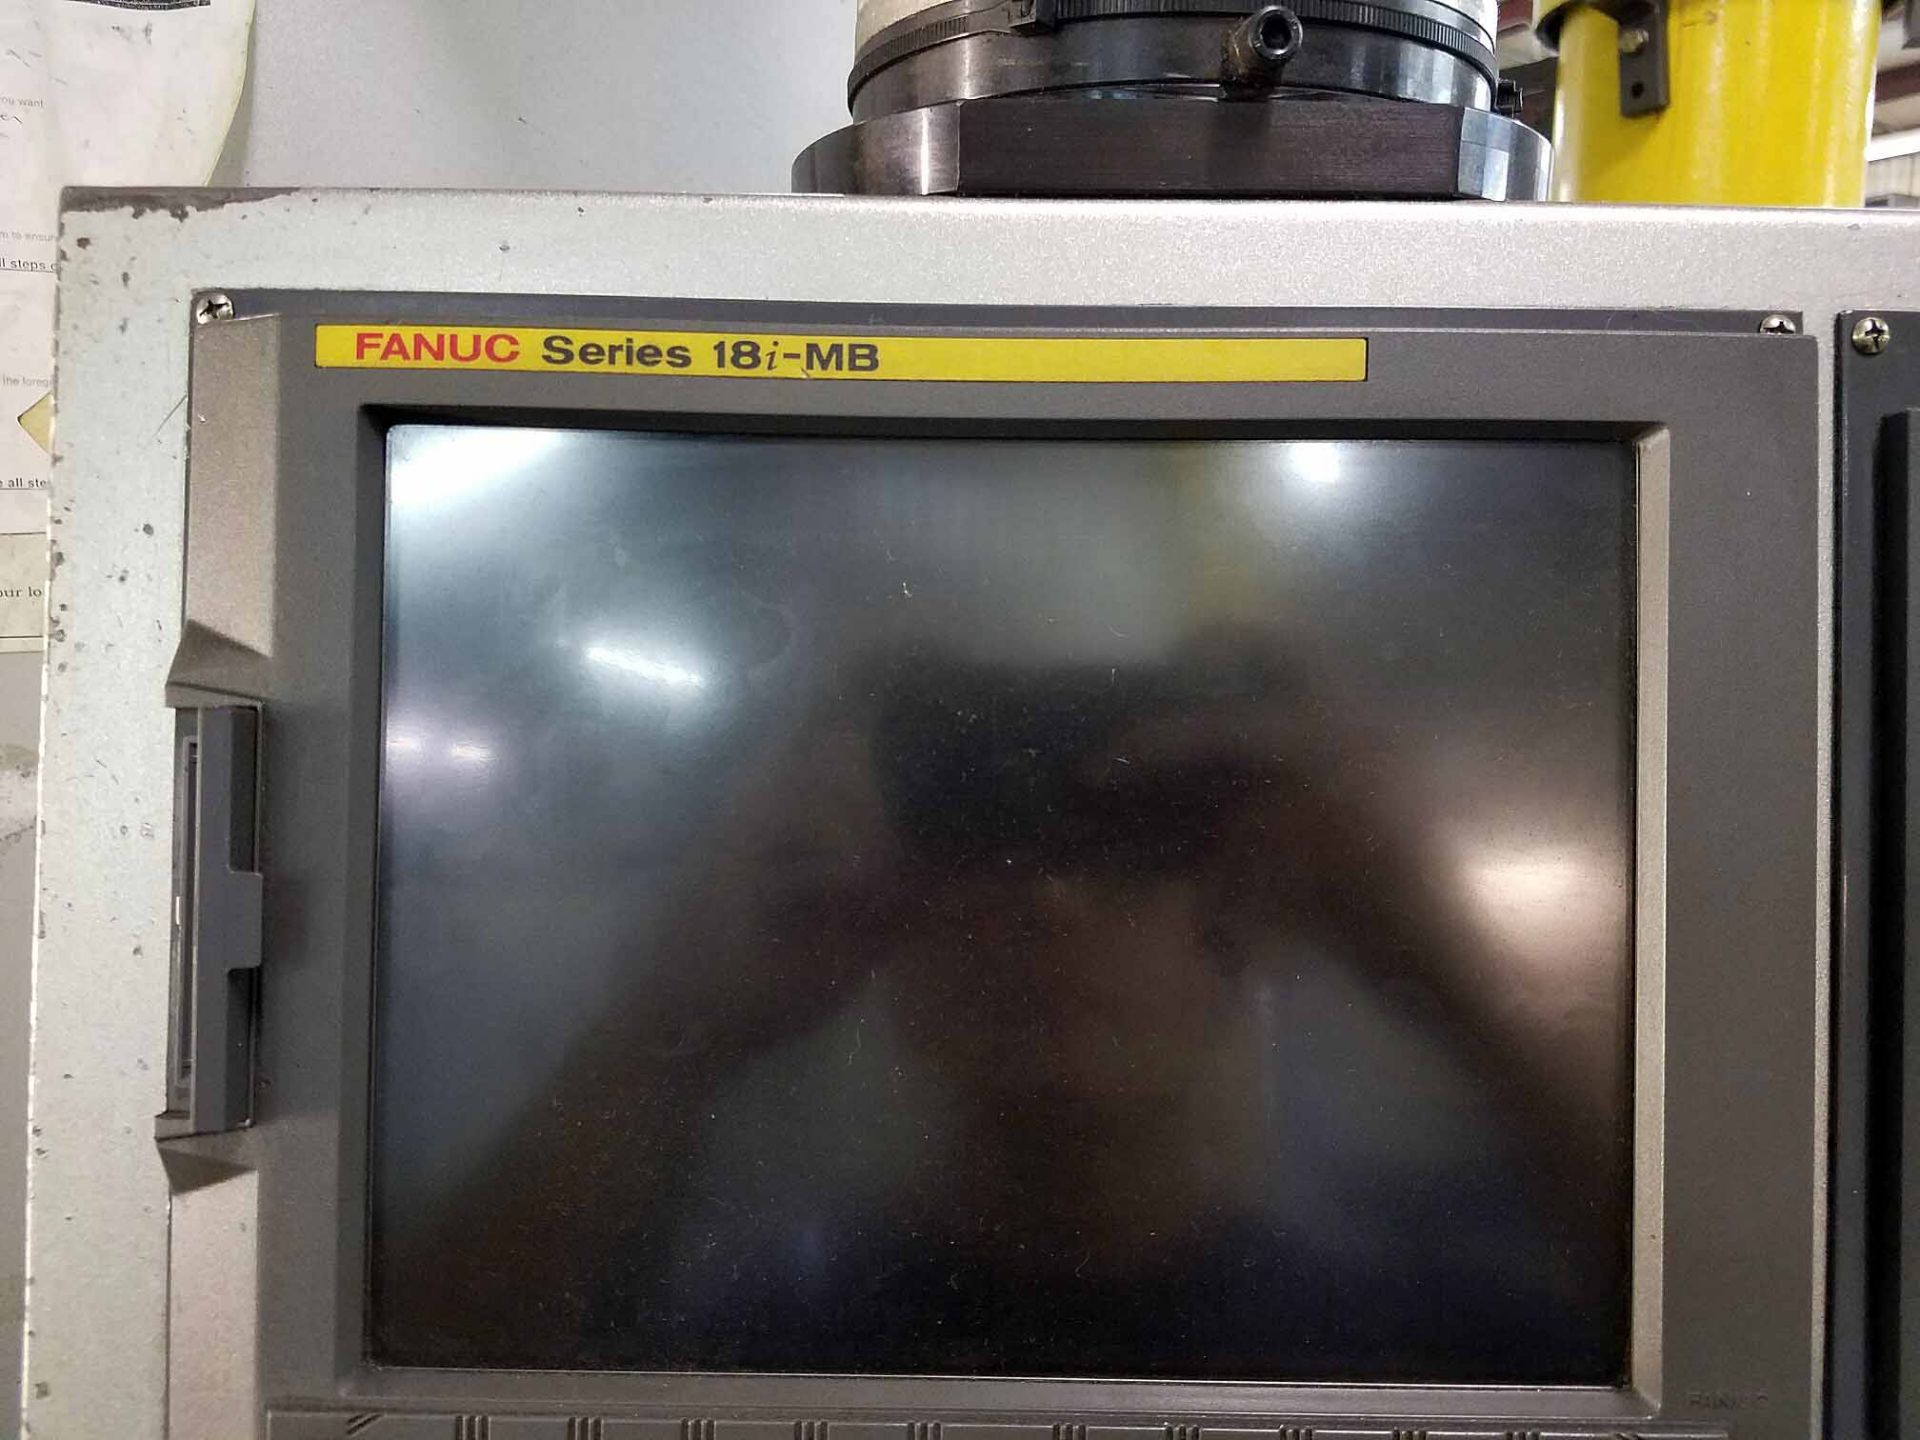 VERTICAL MACHINING CENTER, TOYODA AWEA MDL. BM-850, new 2006, Fanuc Series 18i-MB CNC control, 33" - Image 3 of 13